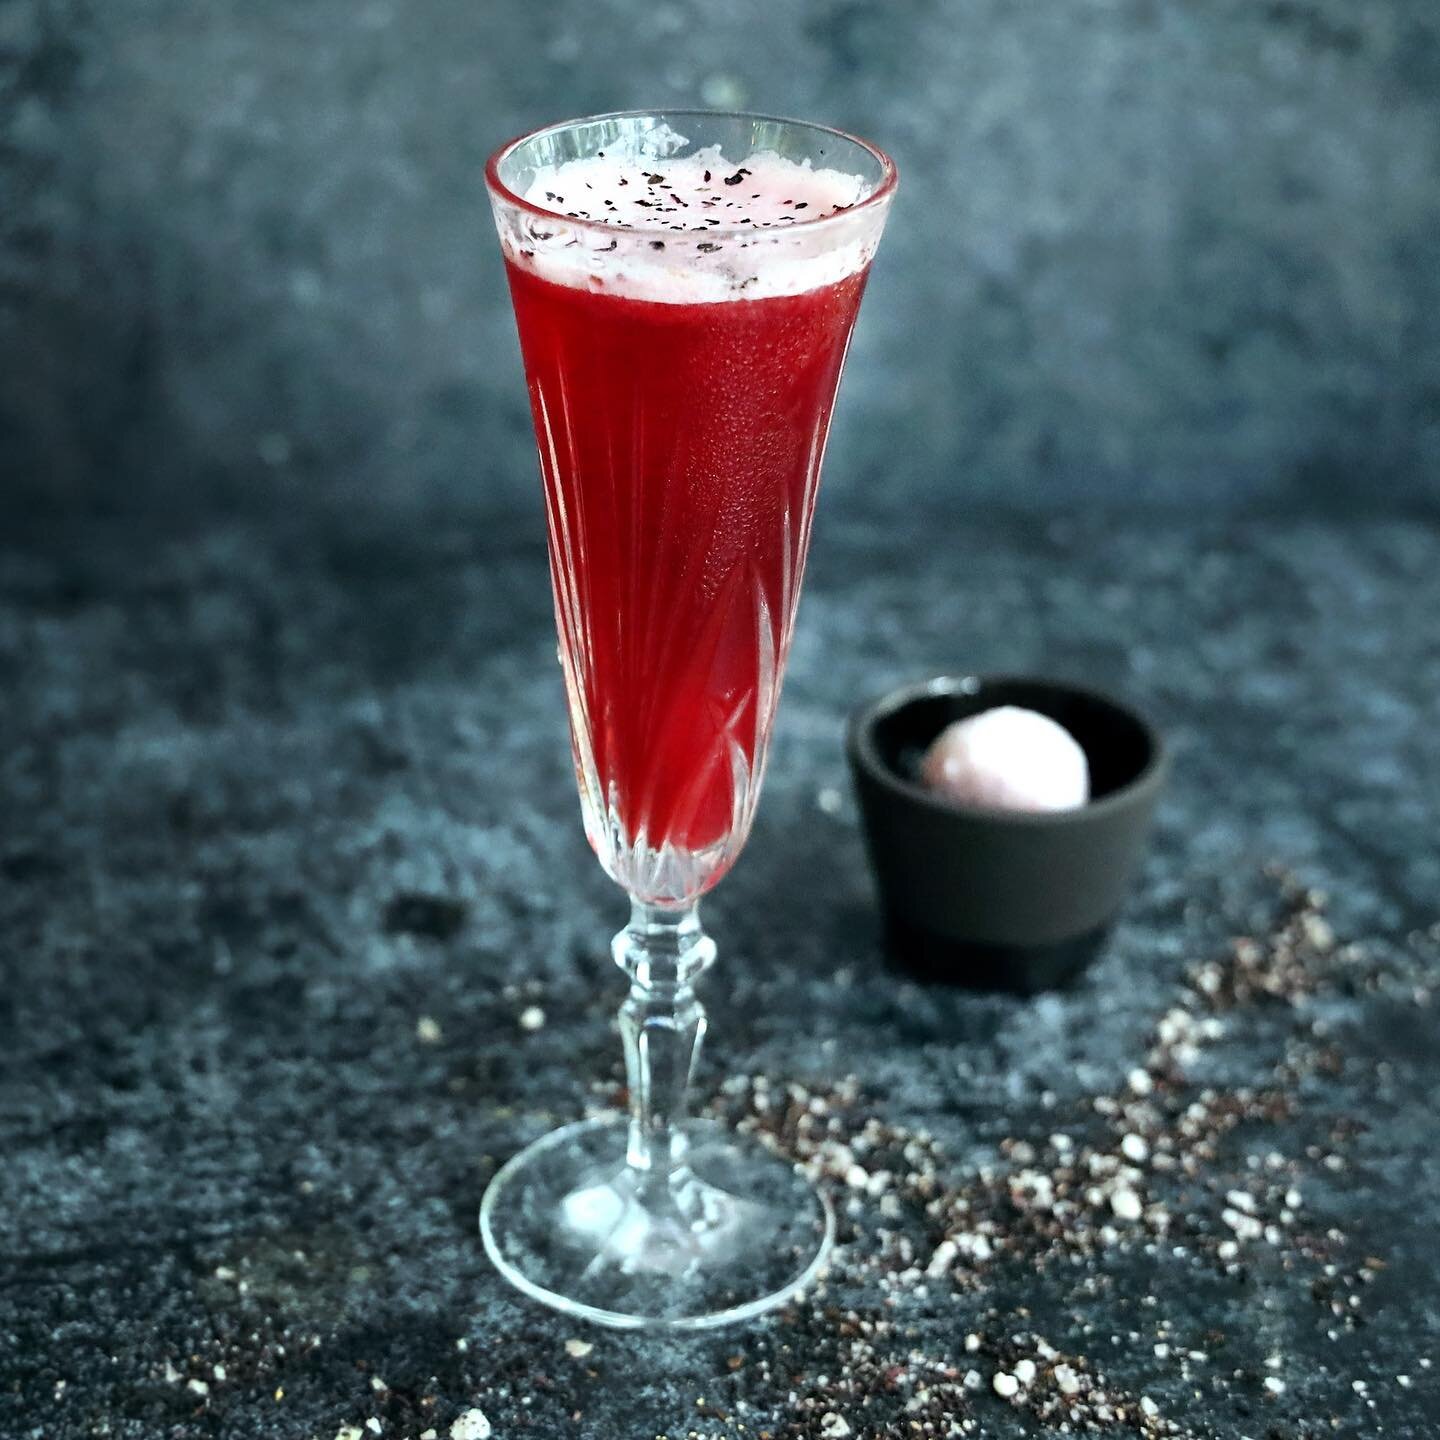 A creation combined with ingredients of different tones of red, including Kyr&ouml; Pink Gin, Strawberry Syrup and Cabernet Sauvignon. A colour associated with various meanings such as love, passion and strength.

Taste with confidence, the 𝟓𝟎 𝐒𝐡